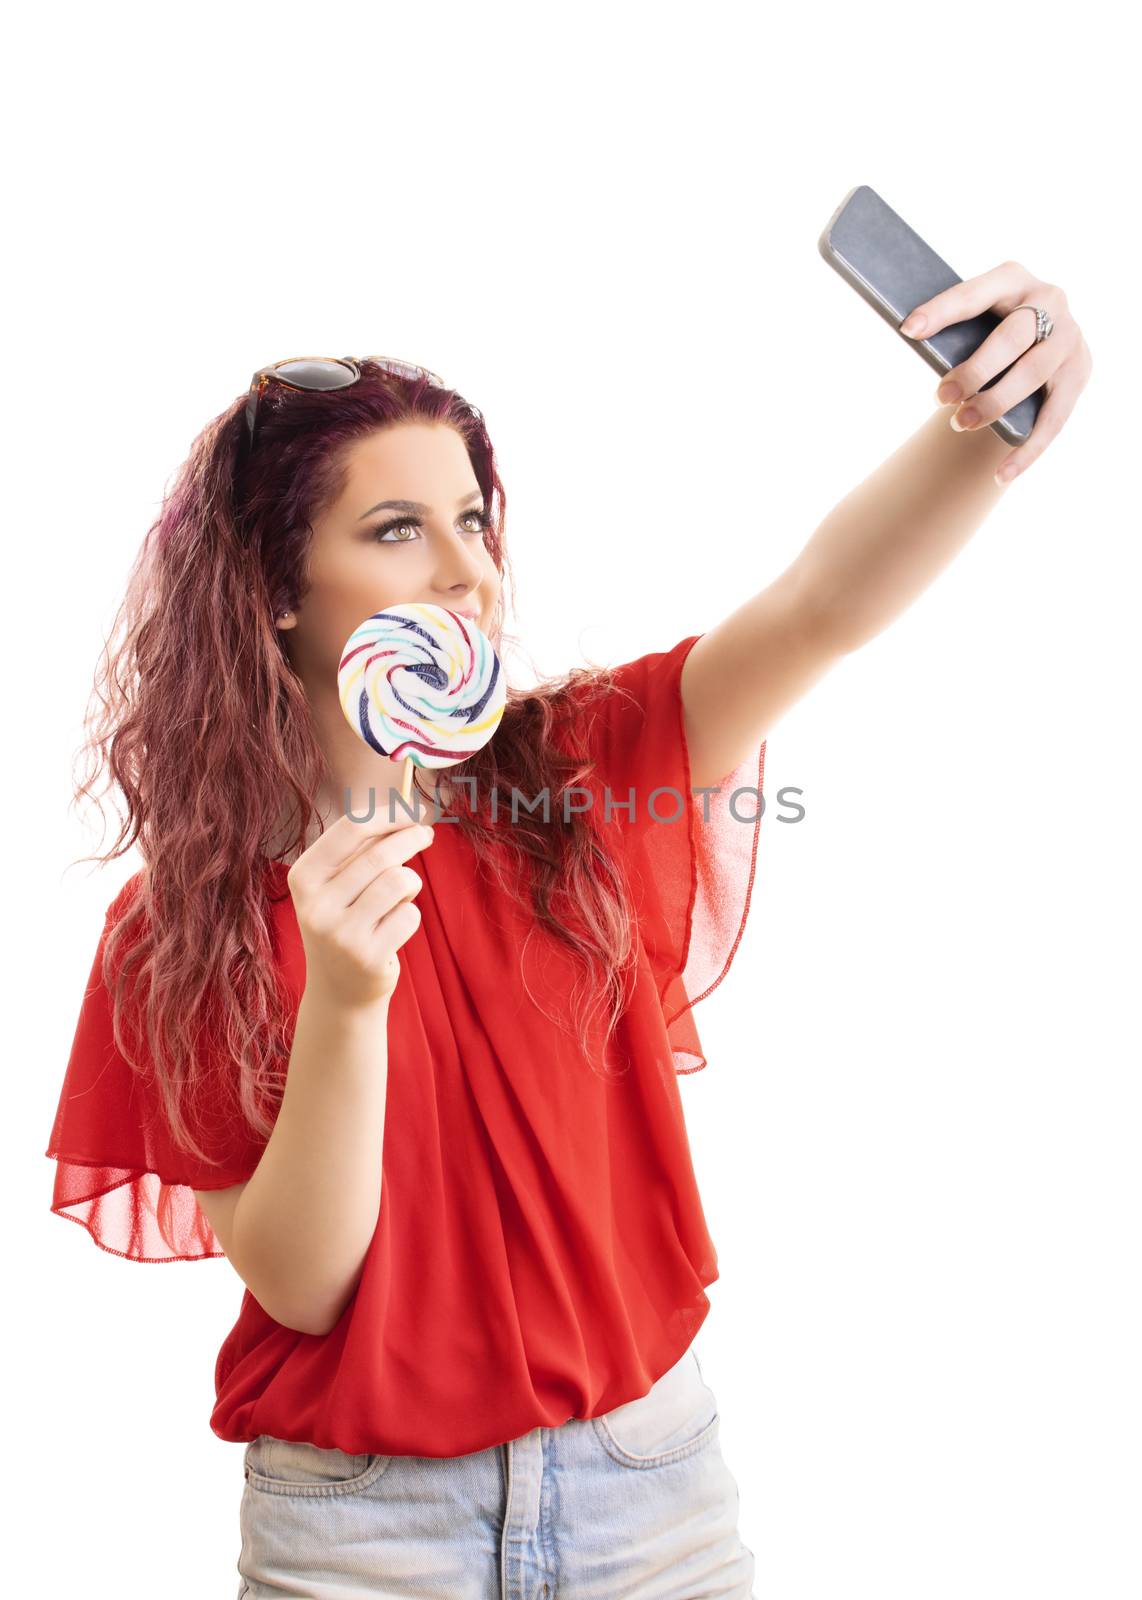 Beautiful fashionable young girl taking a selfie with a lollipop, isolated on white background.